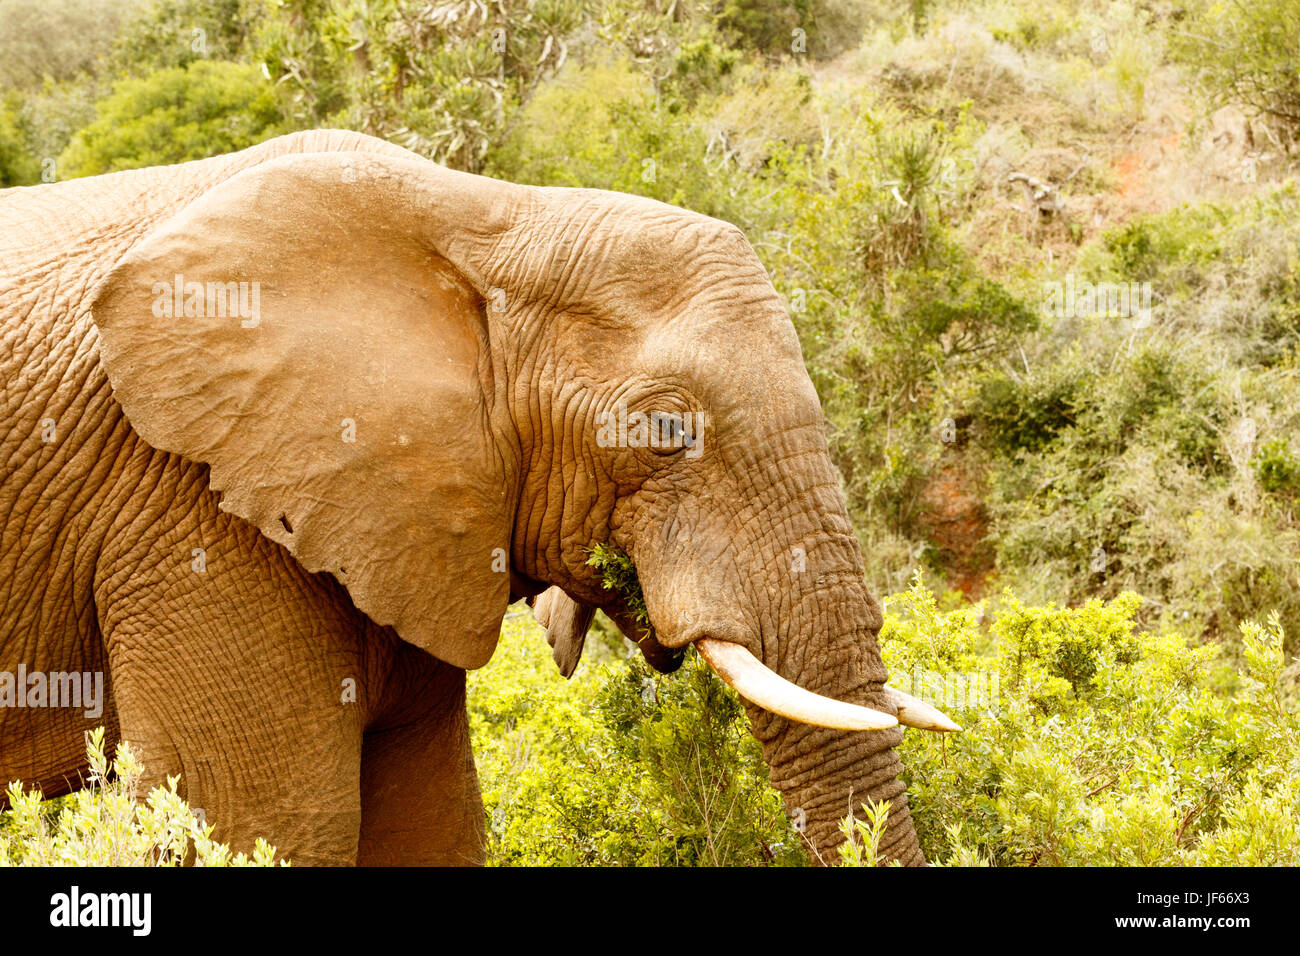 Close up of a Bush Elephant standing and eating Stock Photo